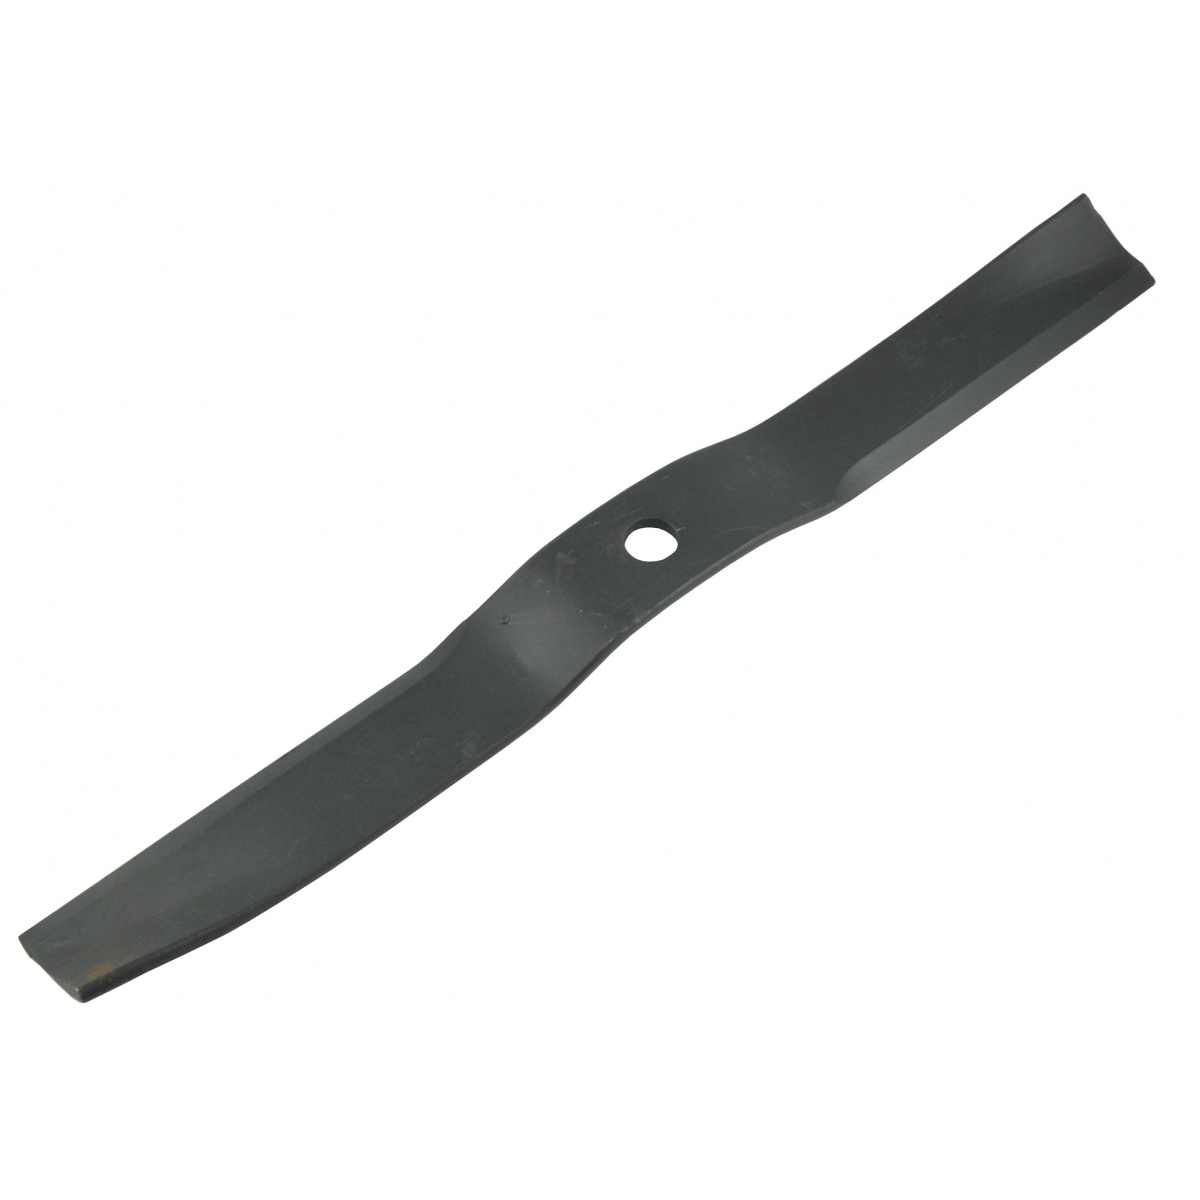 parts to mowers - FM150 lawn mower knife 50 cm